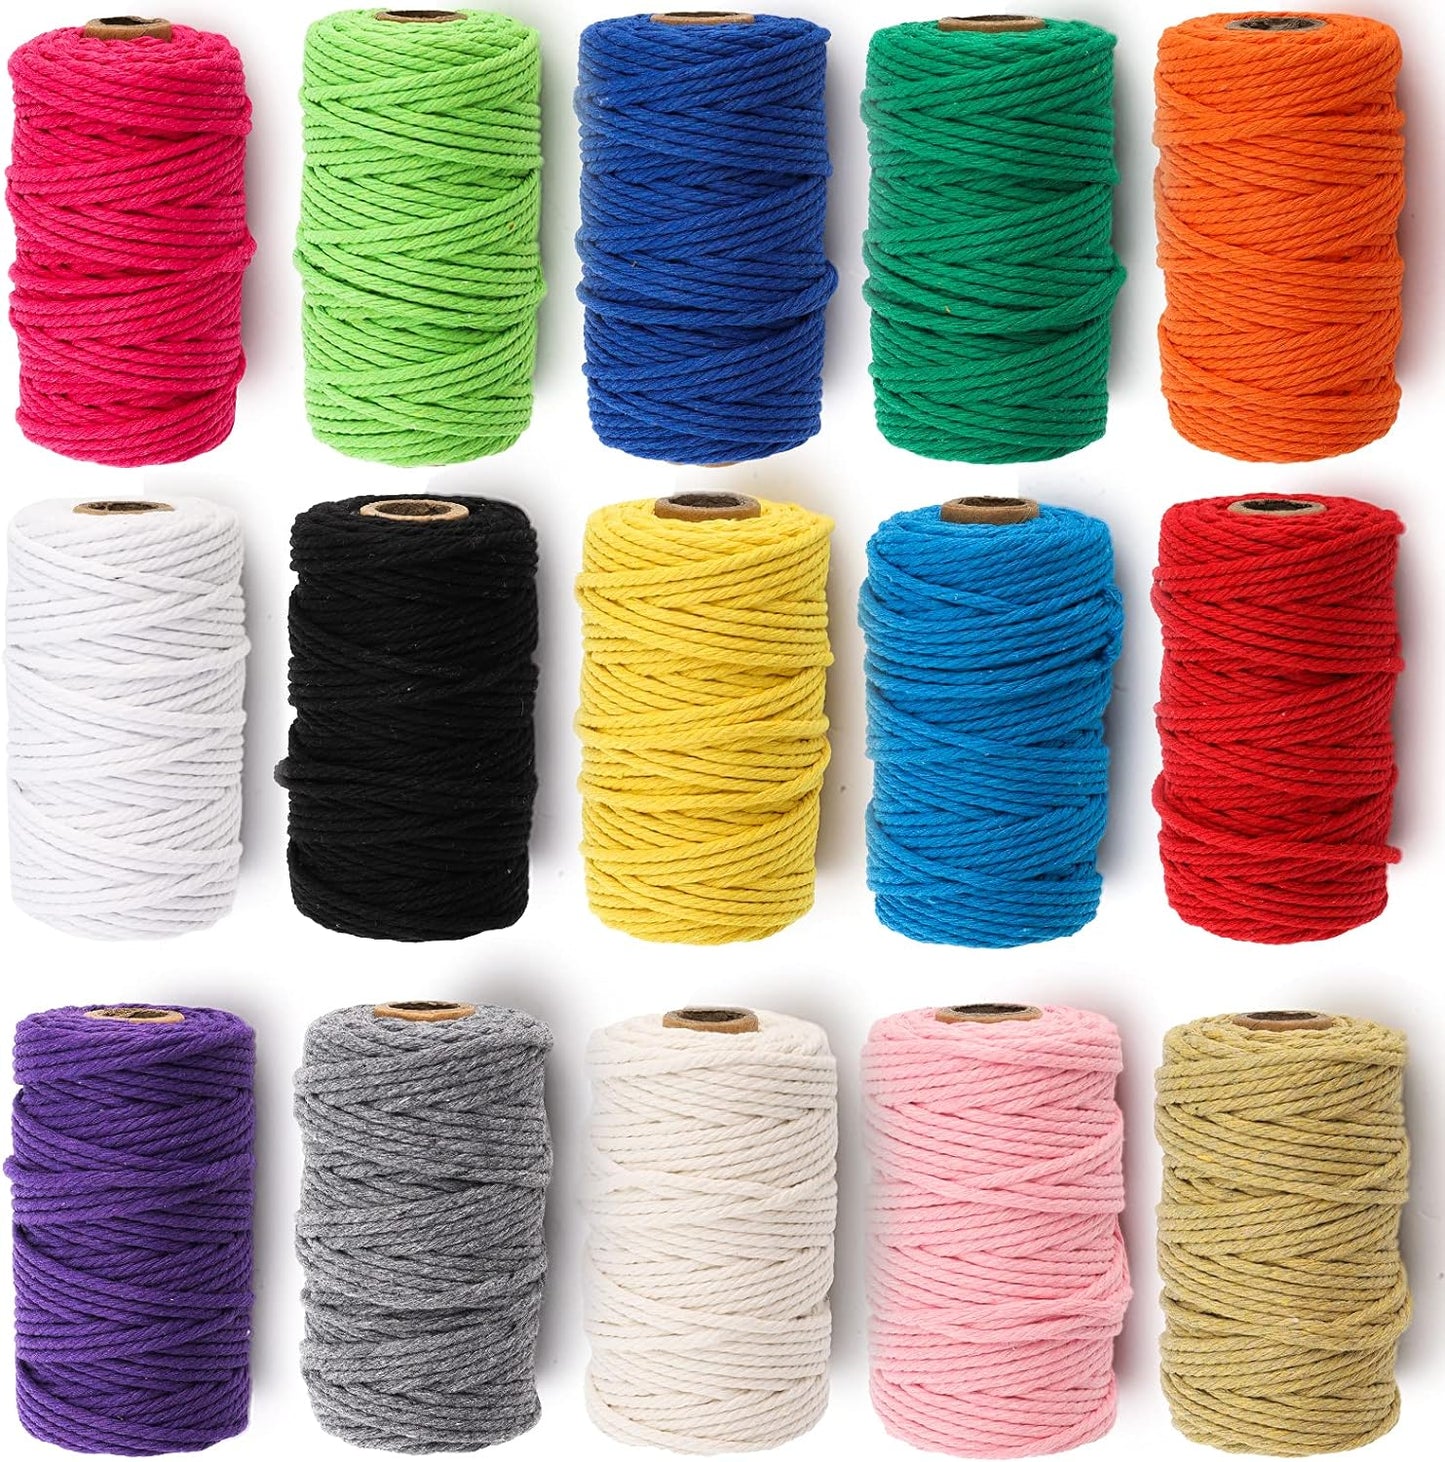 15 Rolls Macrame Cord, 3Mm X 480 Yards Natural Cotton Macrame Rope, 4-Strand Twisted Soft Cotton Twine String Cord for Artworks, Wall Hanging, Plant Hangers, Crafts, Knitting, 15 Colors